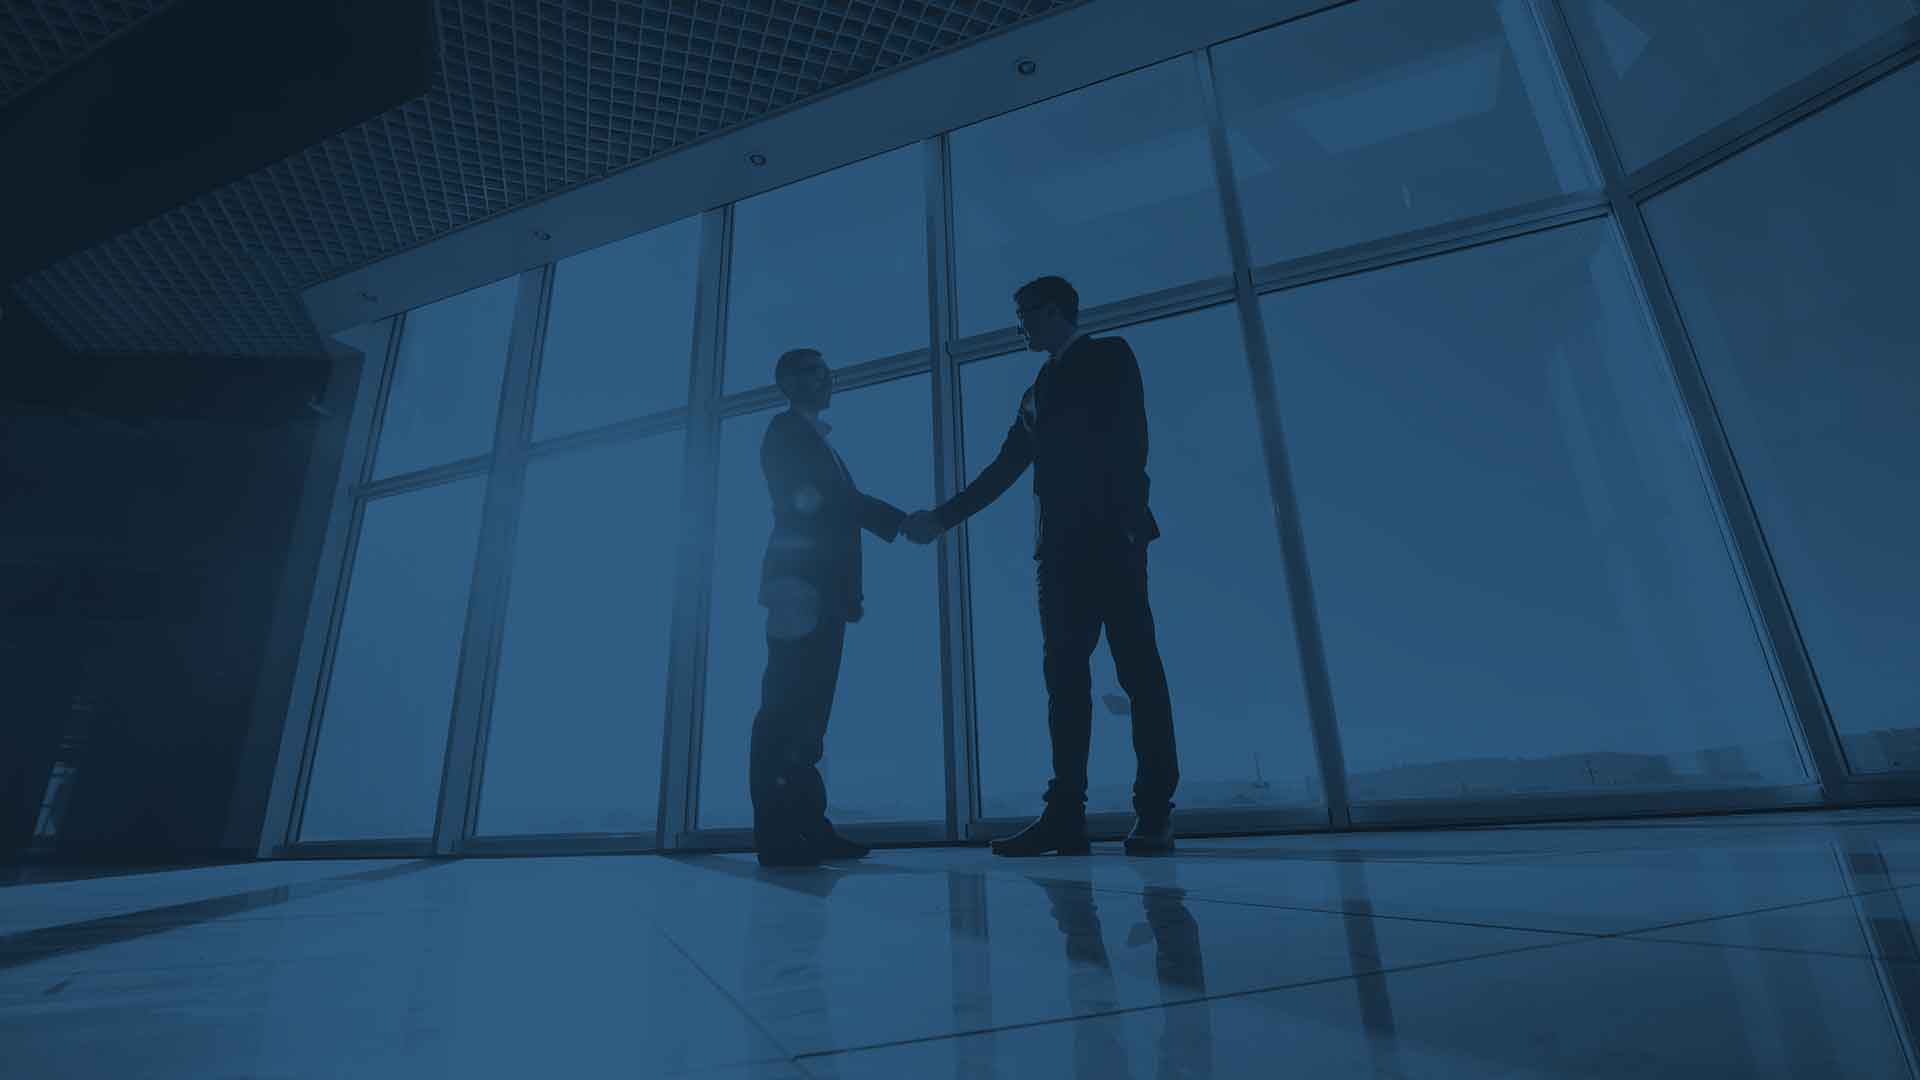 Two people shaking hands in a building